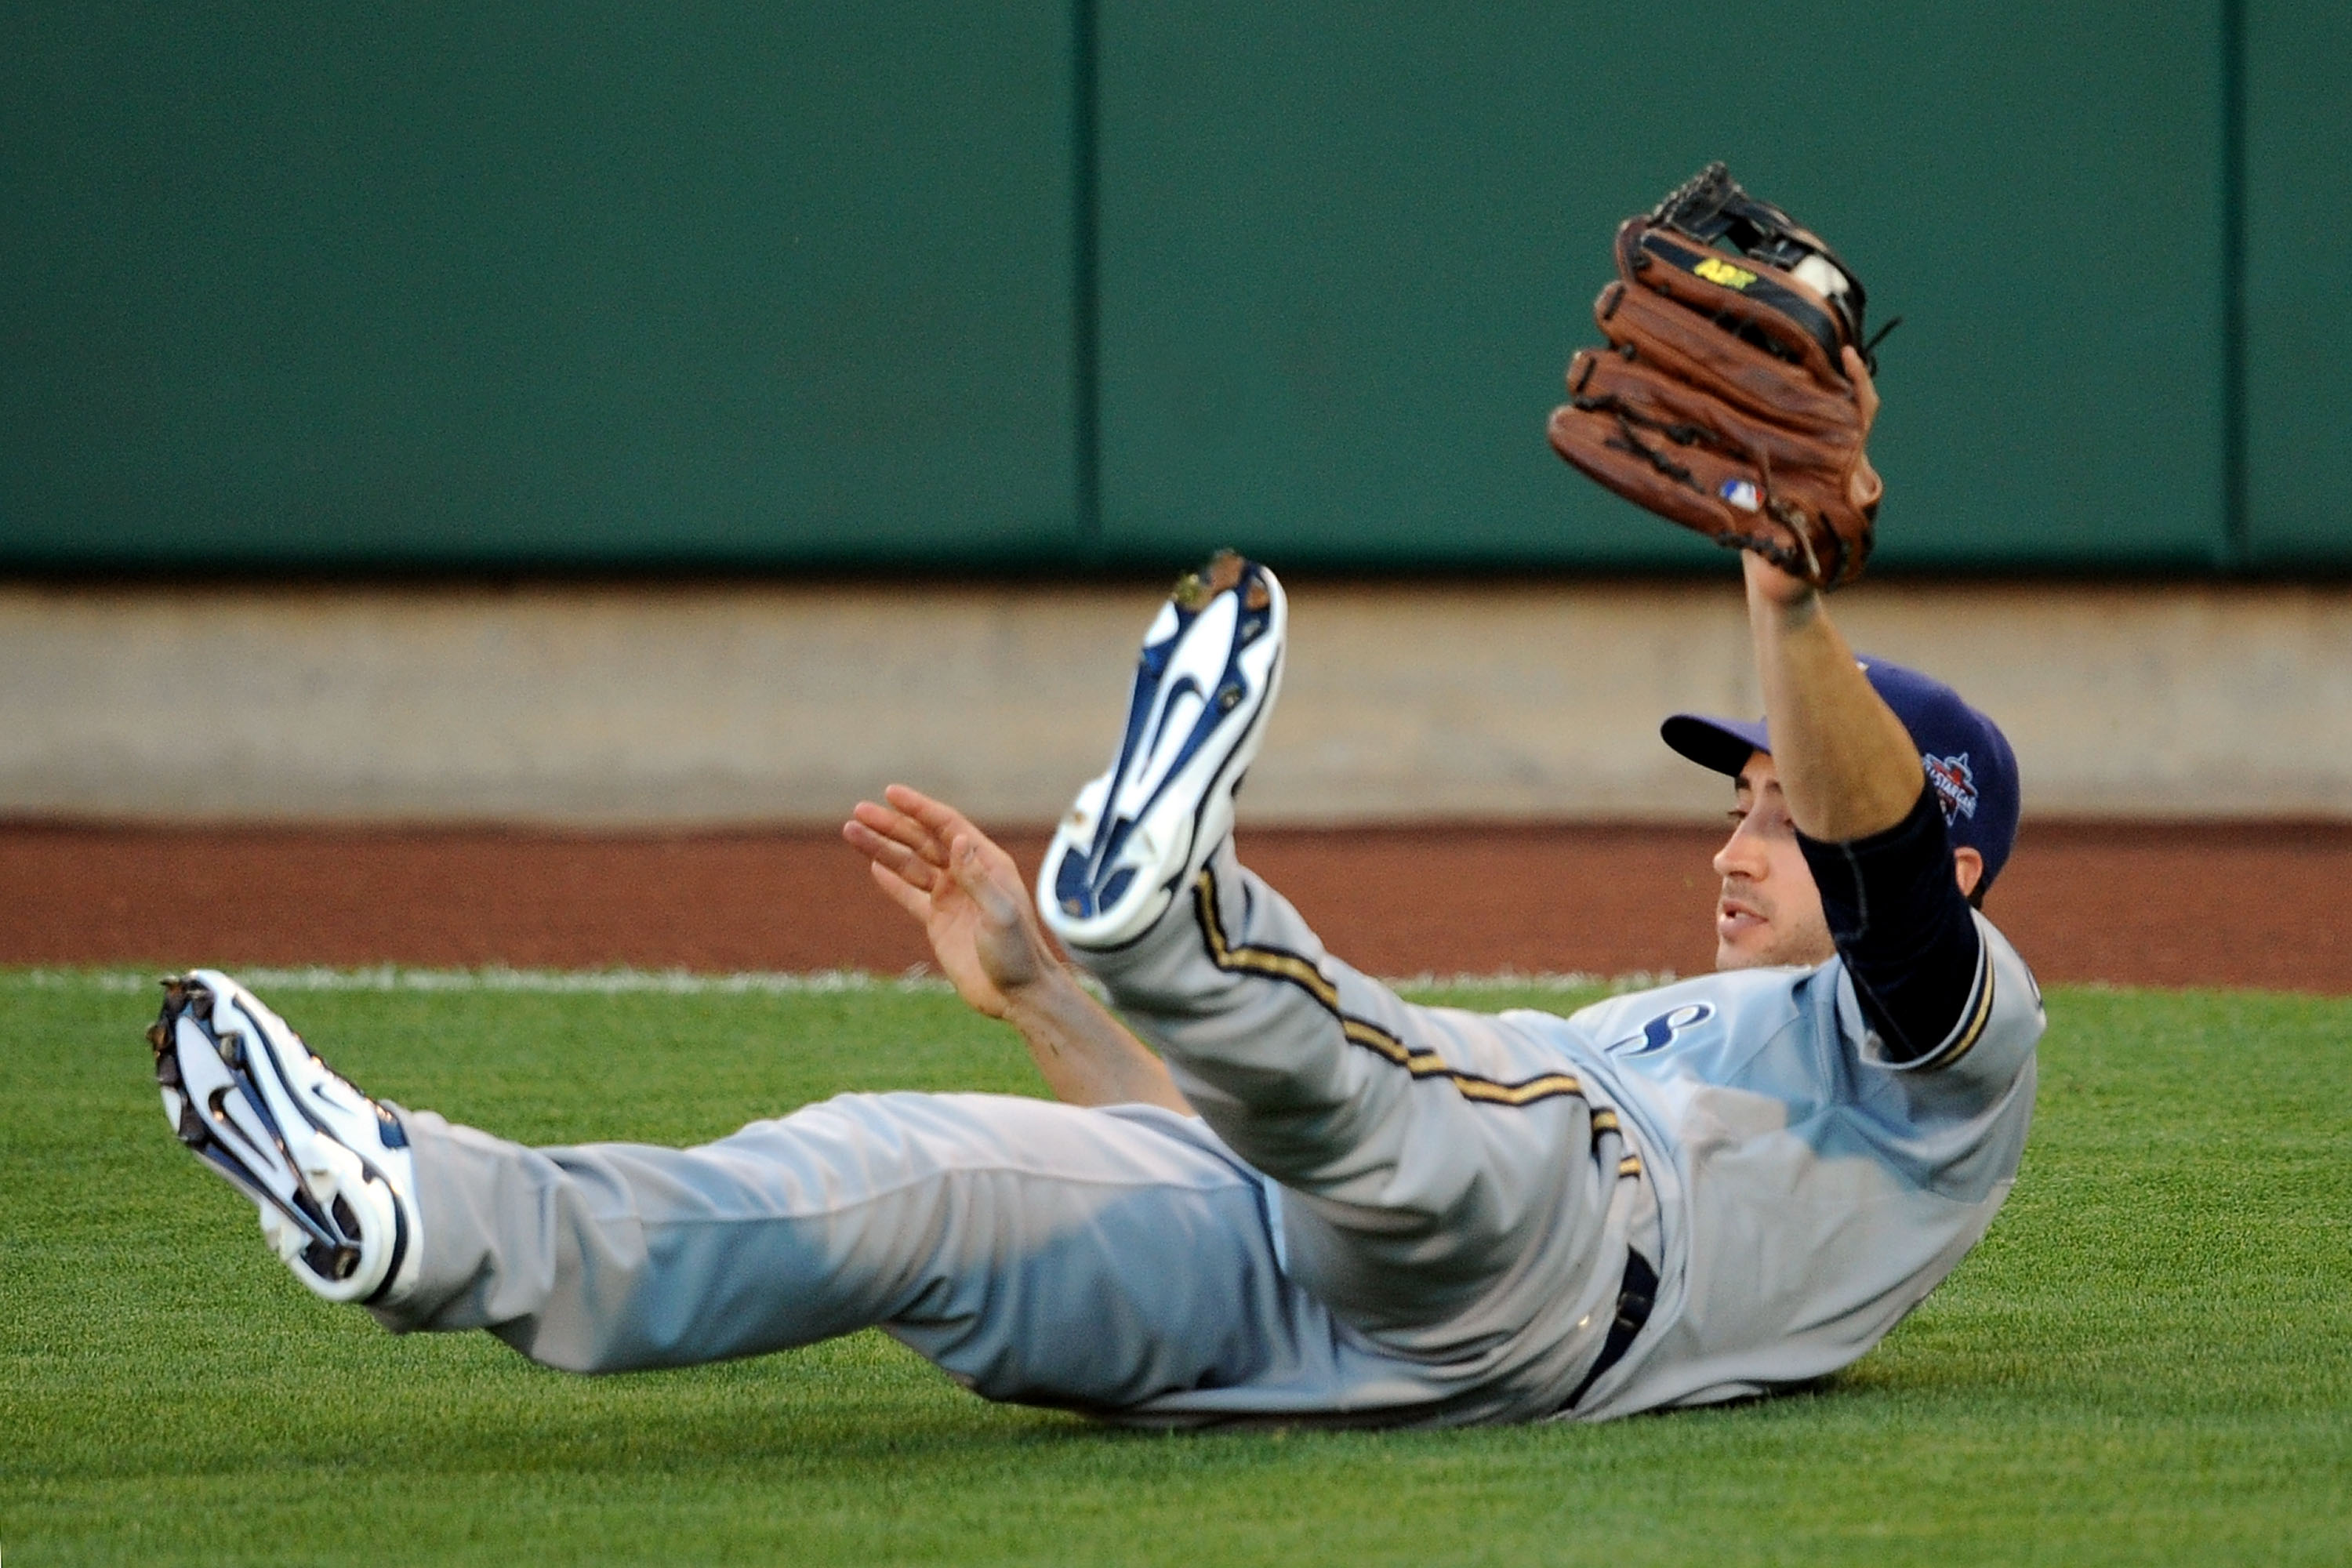 ANAHEIM, CA - JULY 13:  National League All-Star Ryan Bruan #8 of the Milwaukee Brewers dives to catch the ball during the 81st MLB All-Star Game at Angel Stadium of Anaheim on July 13, 2010 in Anaheim, California.  (Photo by Lisa Blumenfeld/Getty Images)